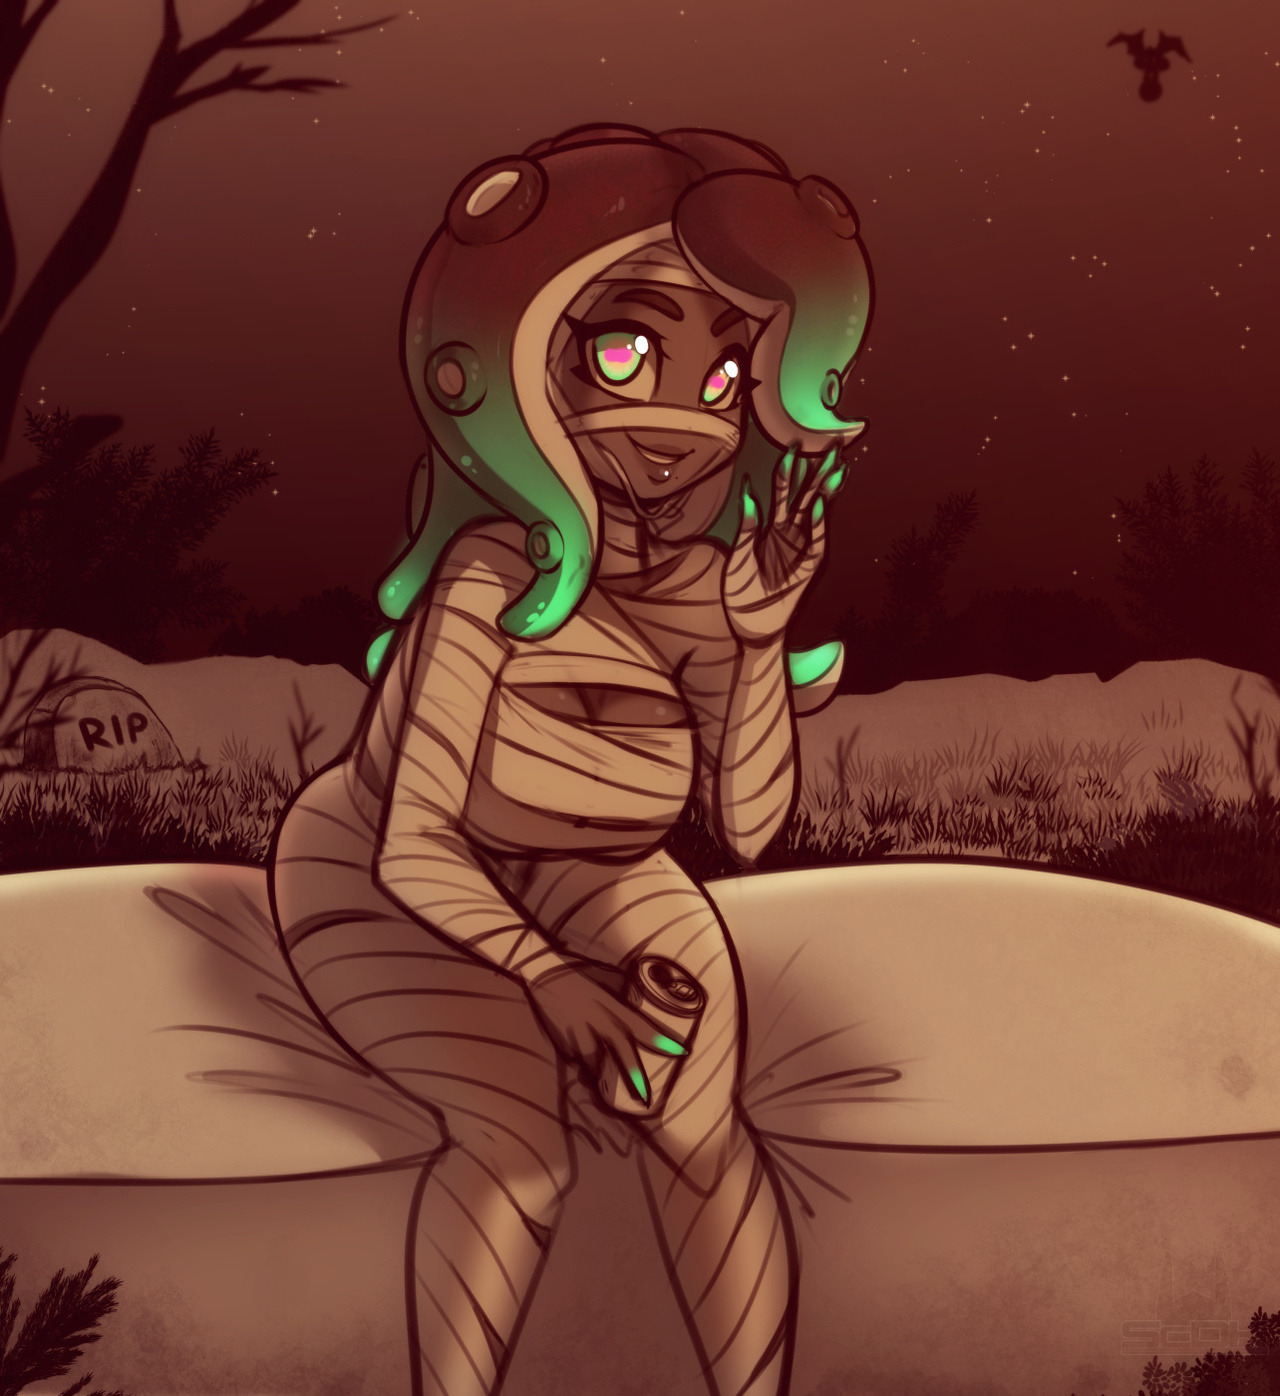 scdk-nsfw: Doodle - Marina Mummy What was supposed to be a quick dumb warmup doodle